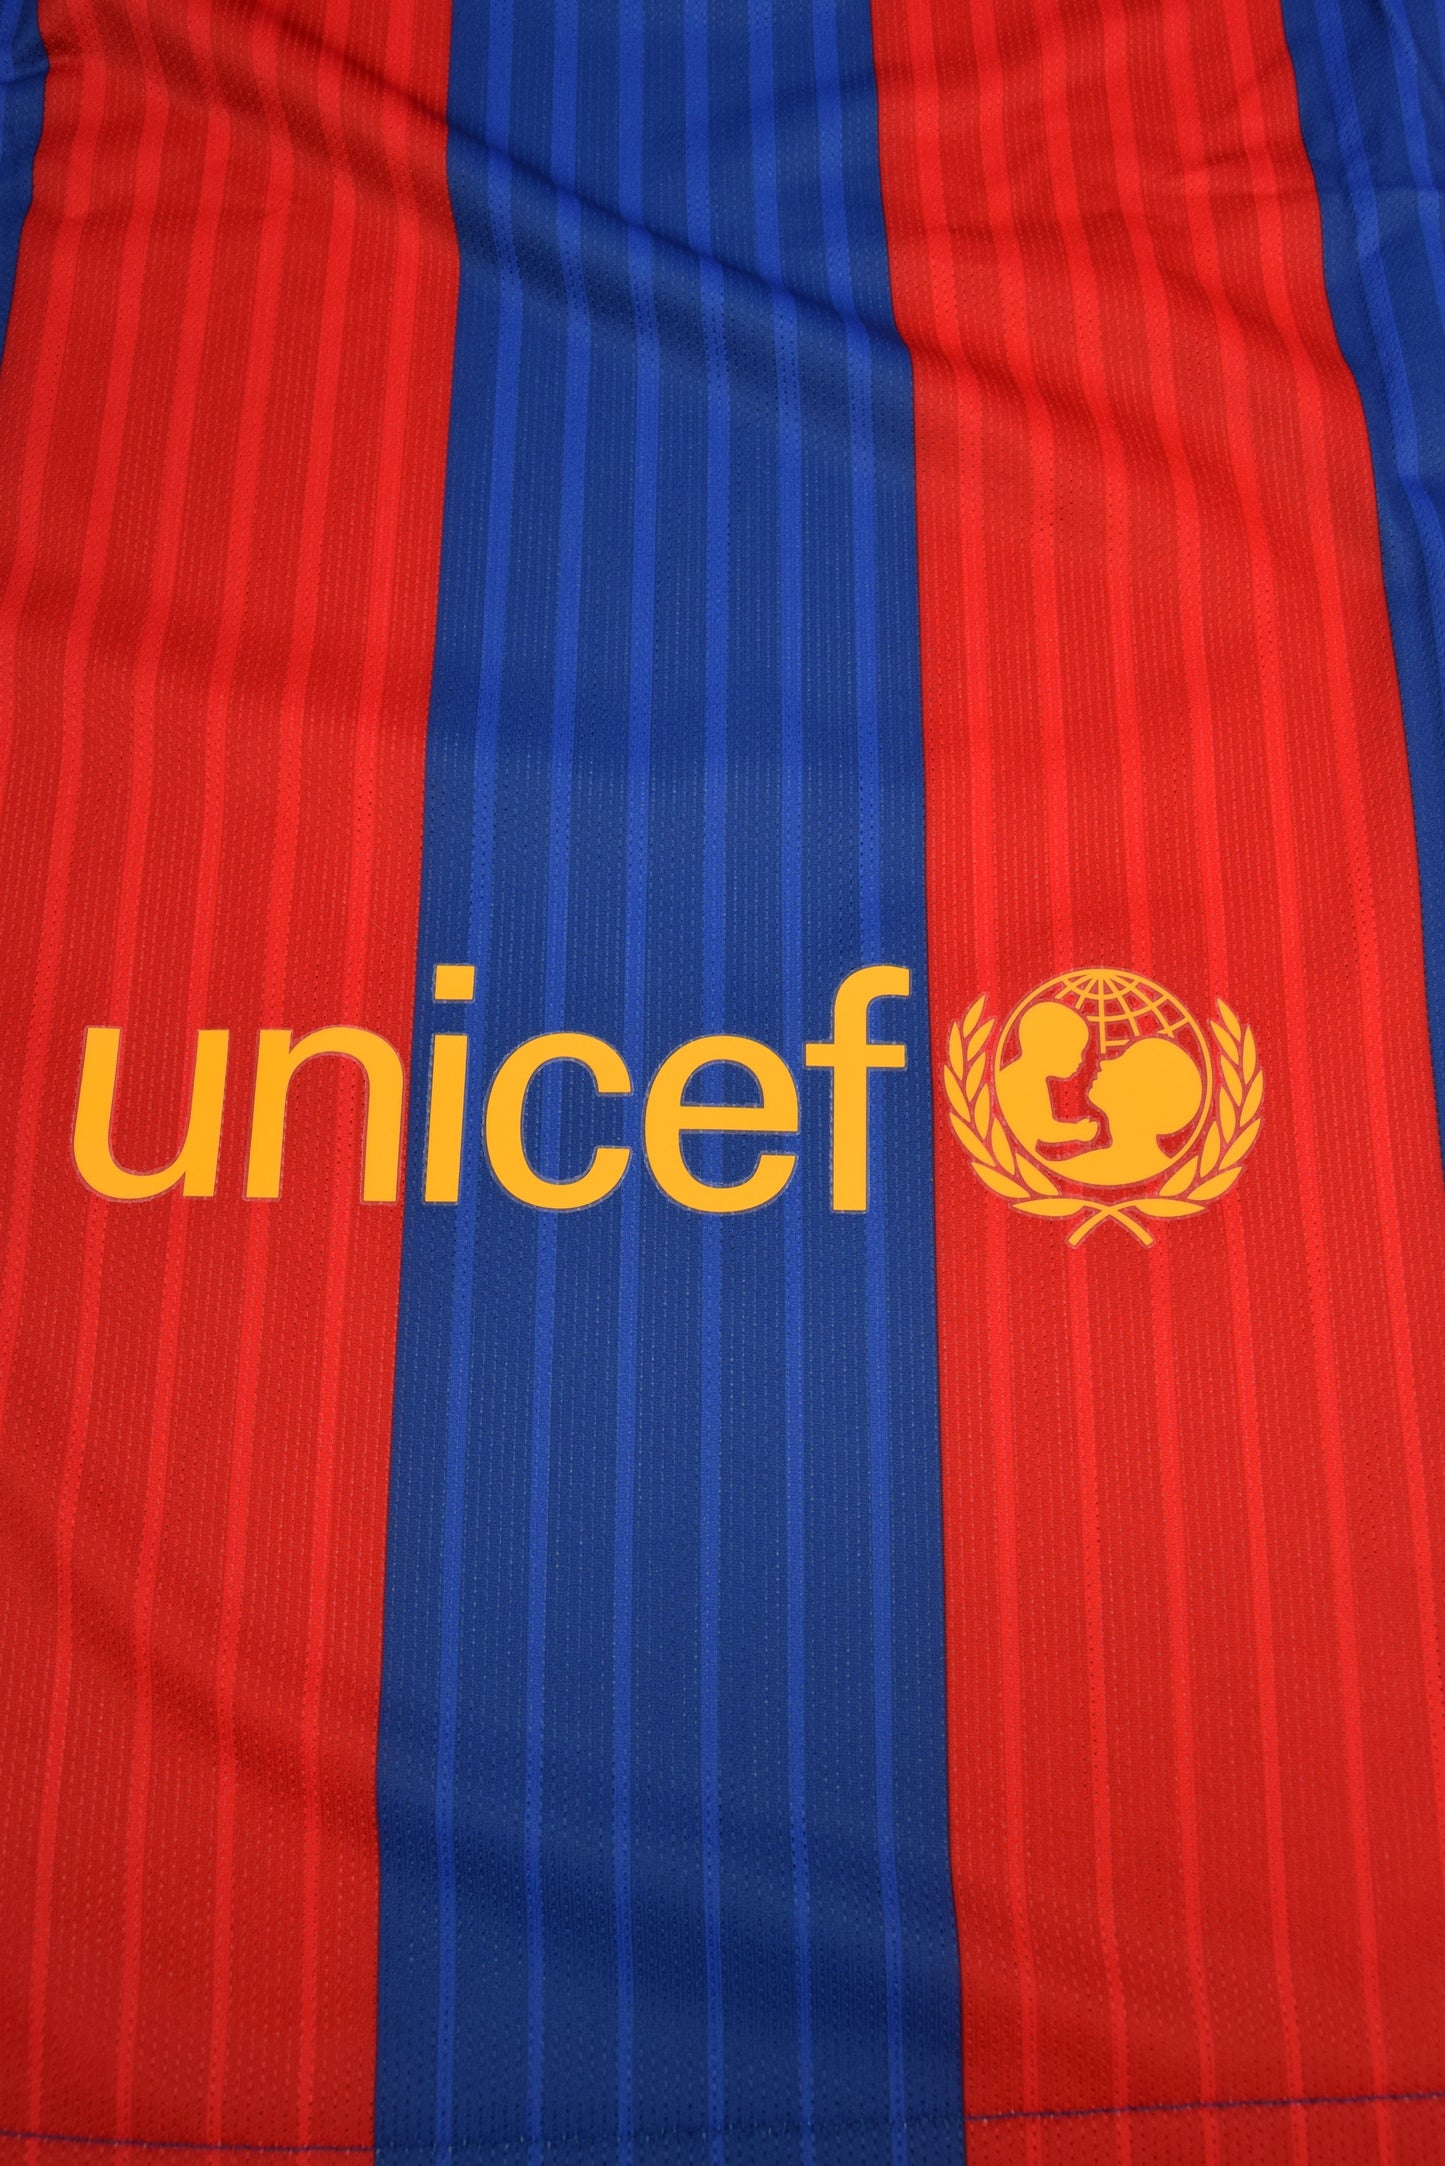 Barcelona Nike Aeroswift 2016 - 2017 Player Issue Home Football Shirt Size M Red Blue Long Sleeves New BNWT Deadstock Beko Unicef